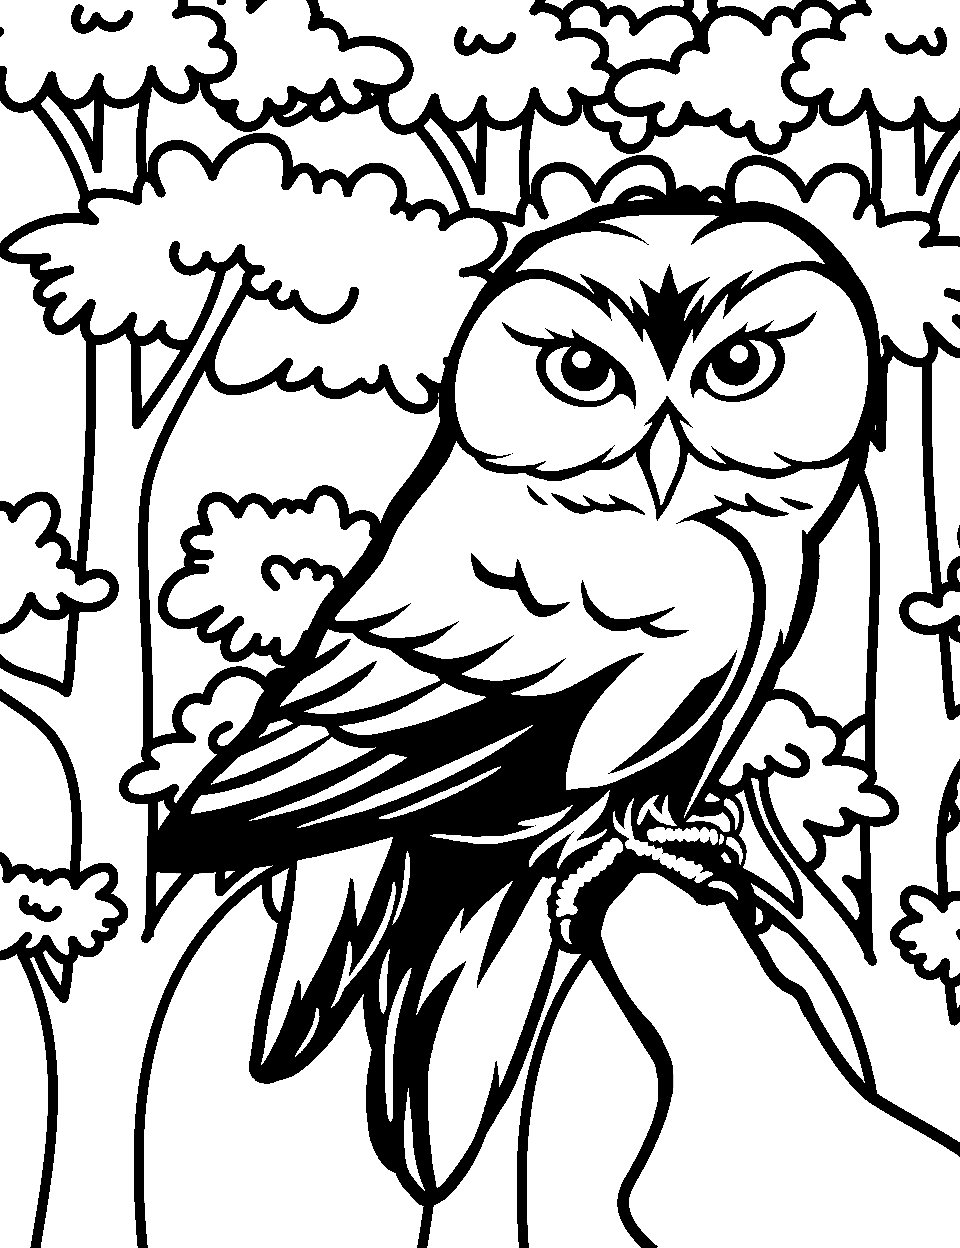 Barred Owl in a Forest Coloring Page - A barred owl sitting in a forest with trees in the background.